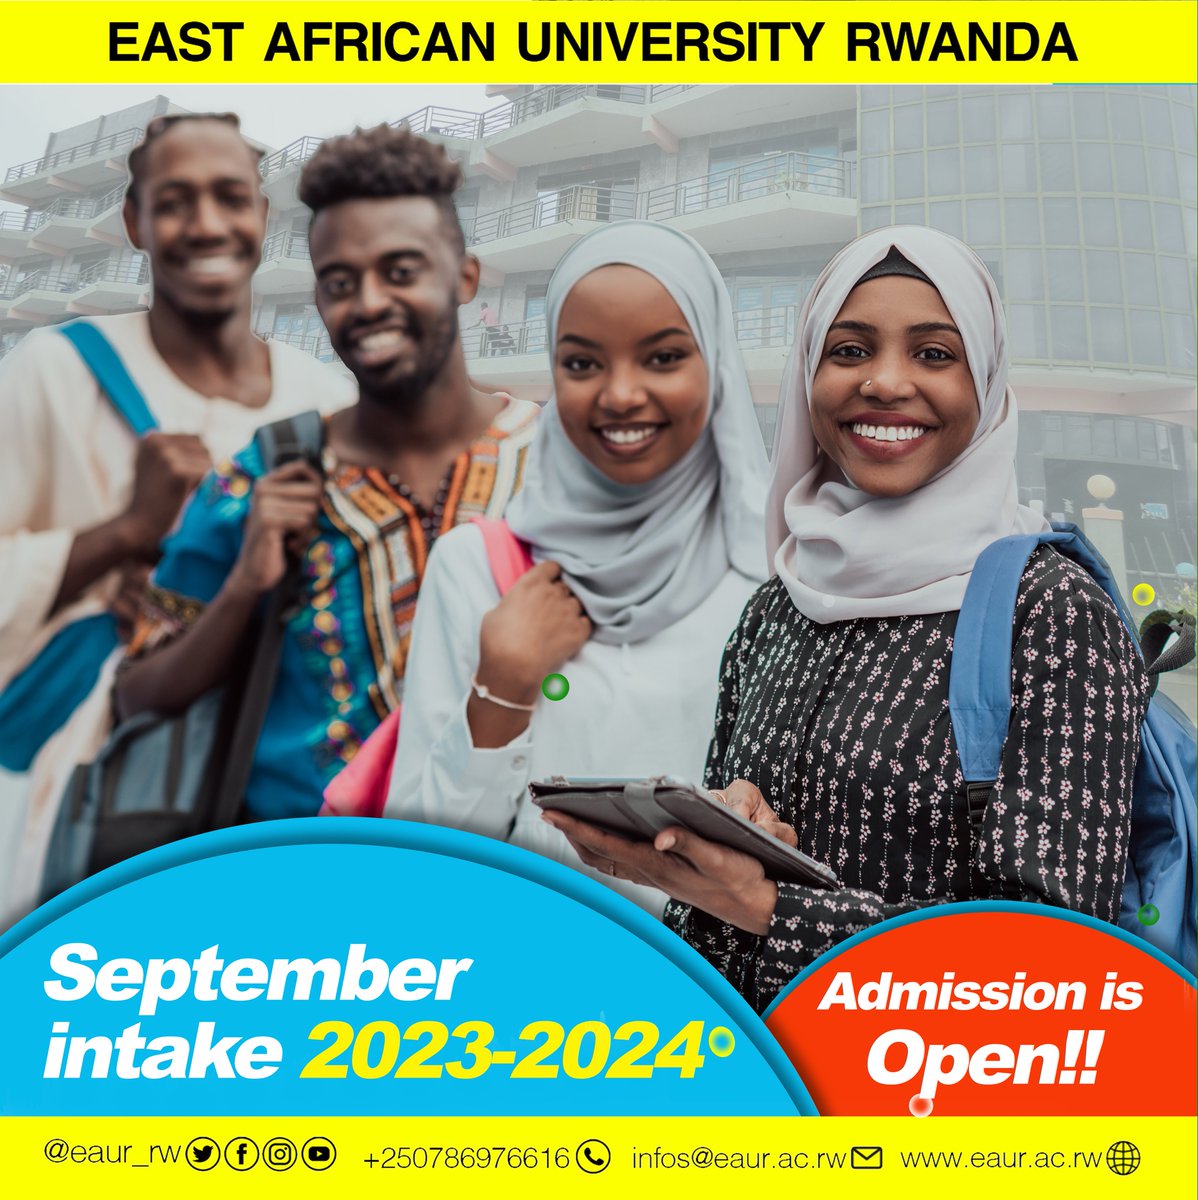 #EastAfricans Admissions for September Intake 2023-2024 is Open now!! Enrol yourself and be part of #EAUR community. 

#EAUR #WeAreEAUR #SeptemberIntake